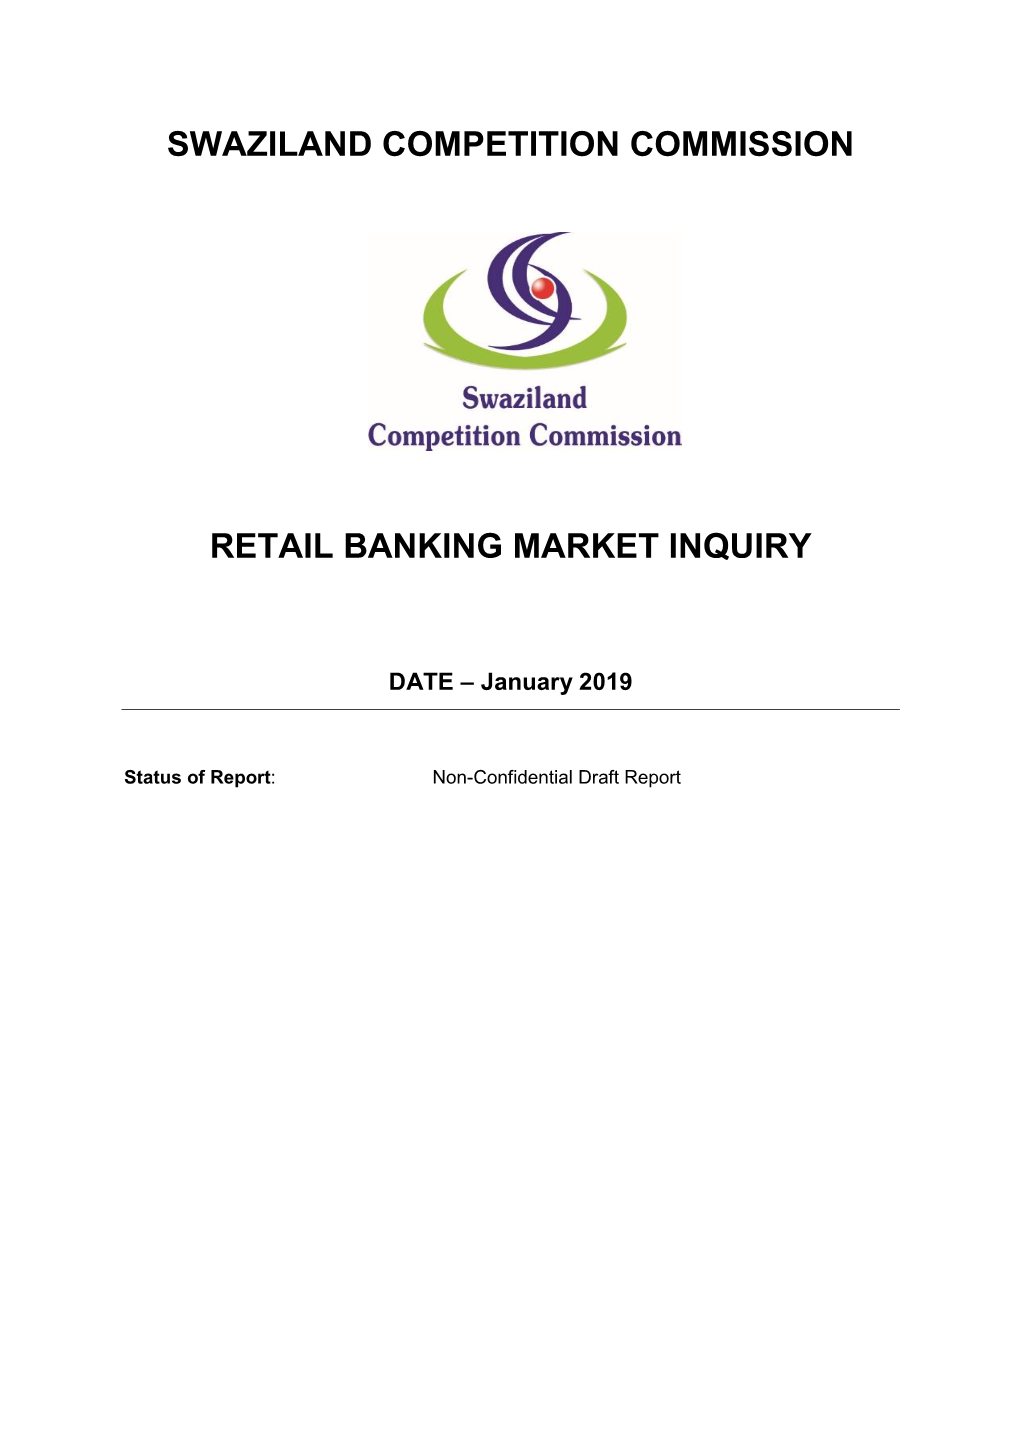 Swaziland Competition Commission Retail Banking